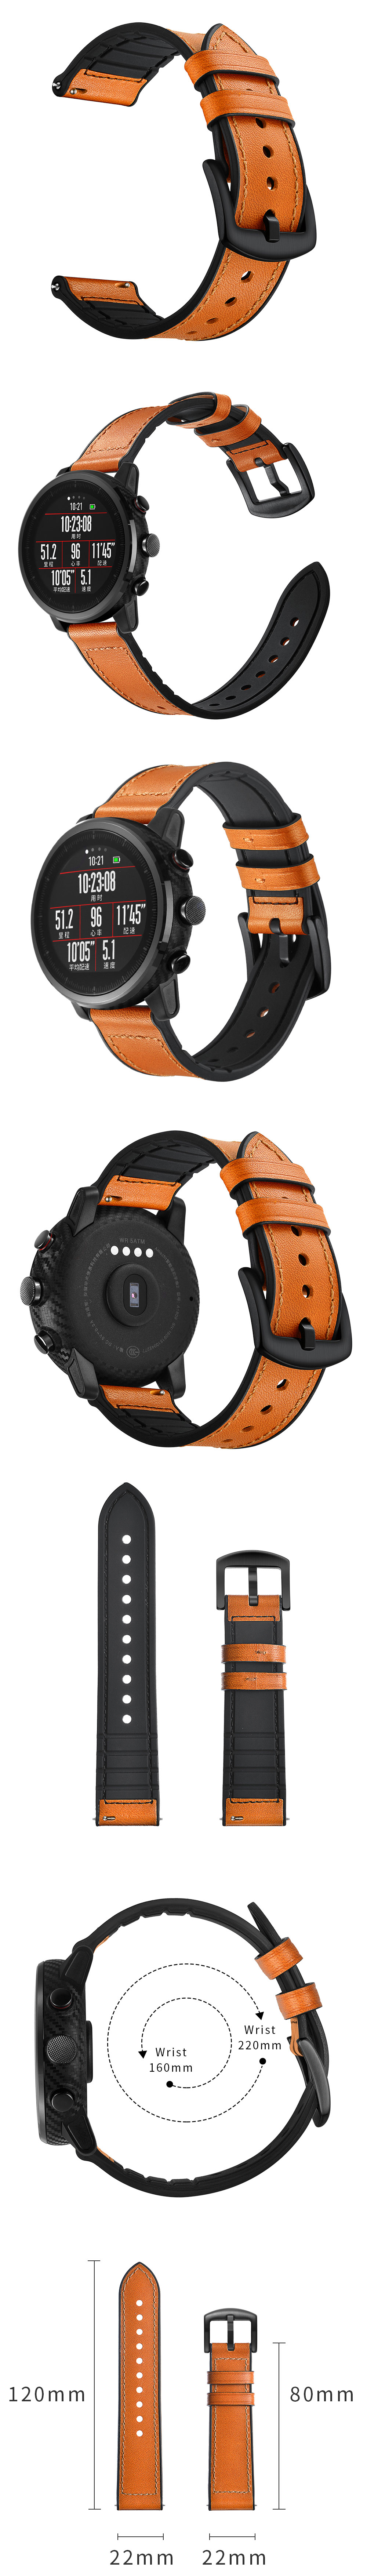 22mm-Silica-gel-Inside-External-Leather-Watch-Band-Watch-Strap-for-Xiaomi-Amazfit-2-1442769